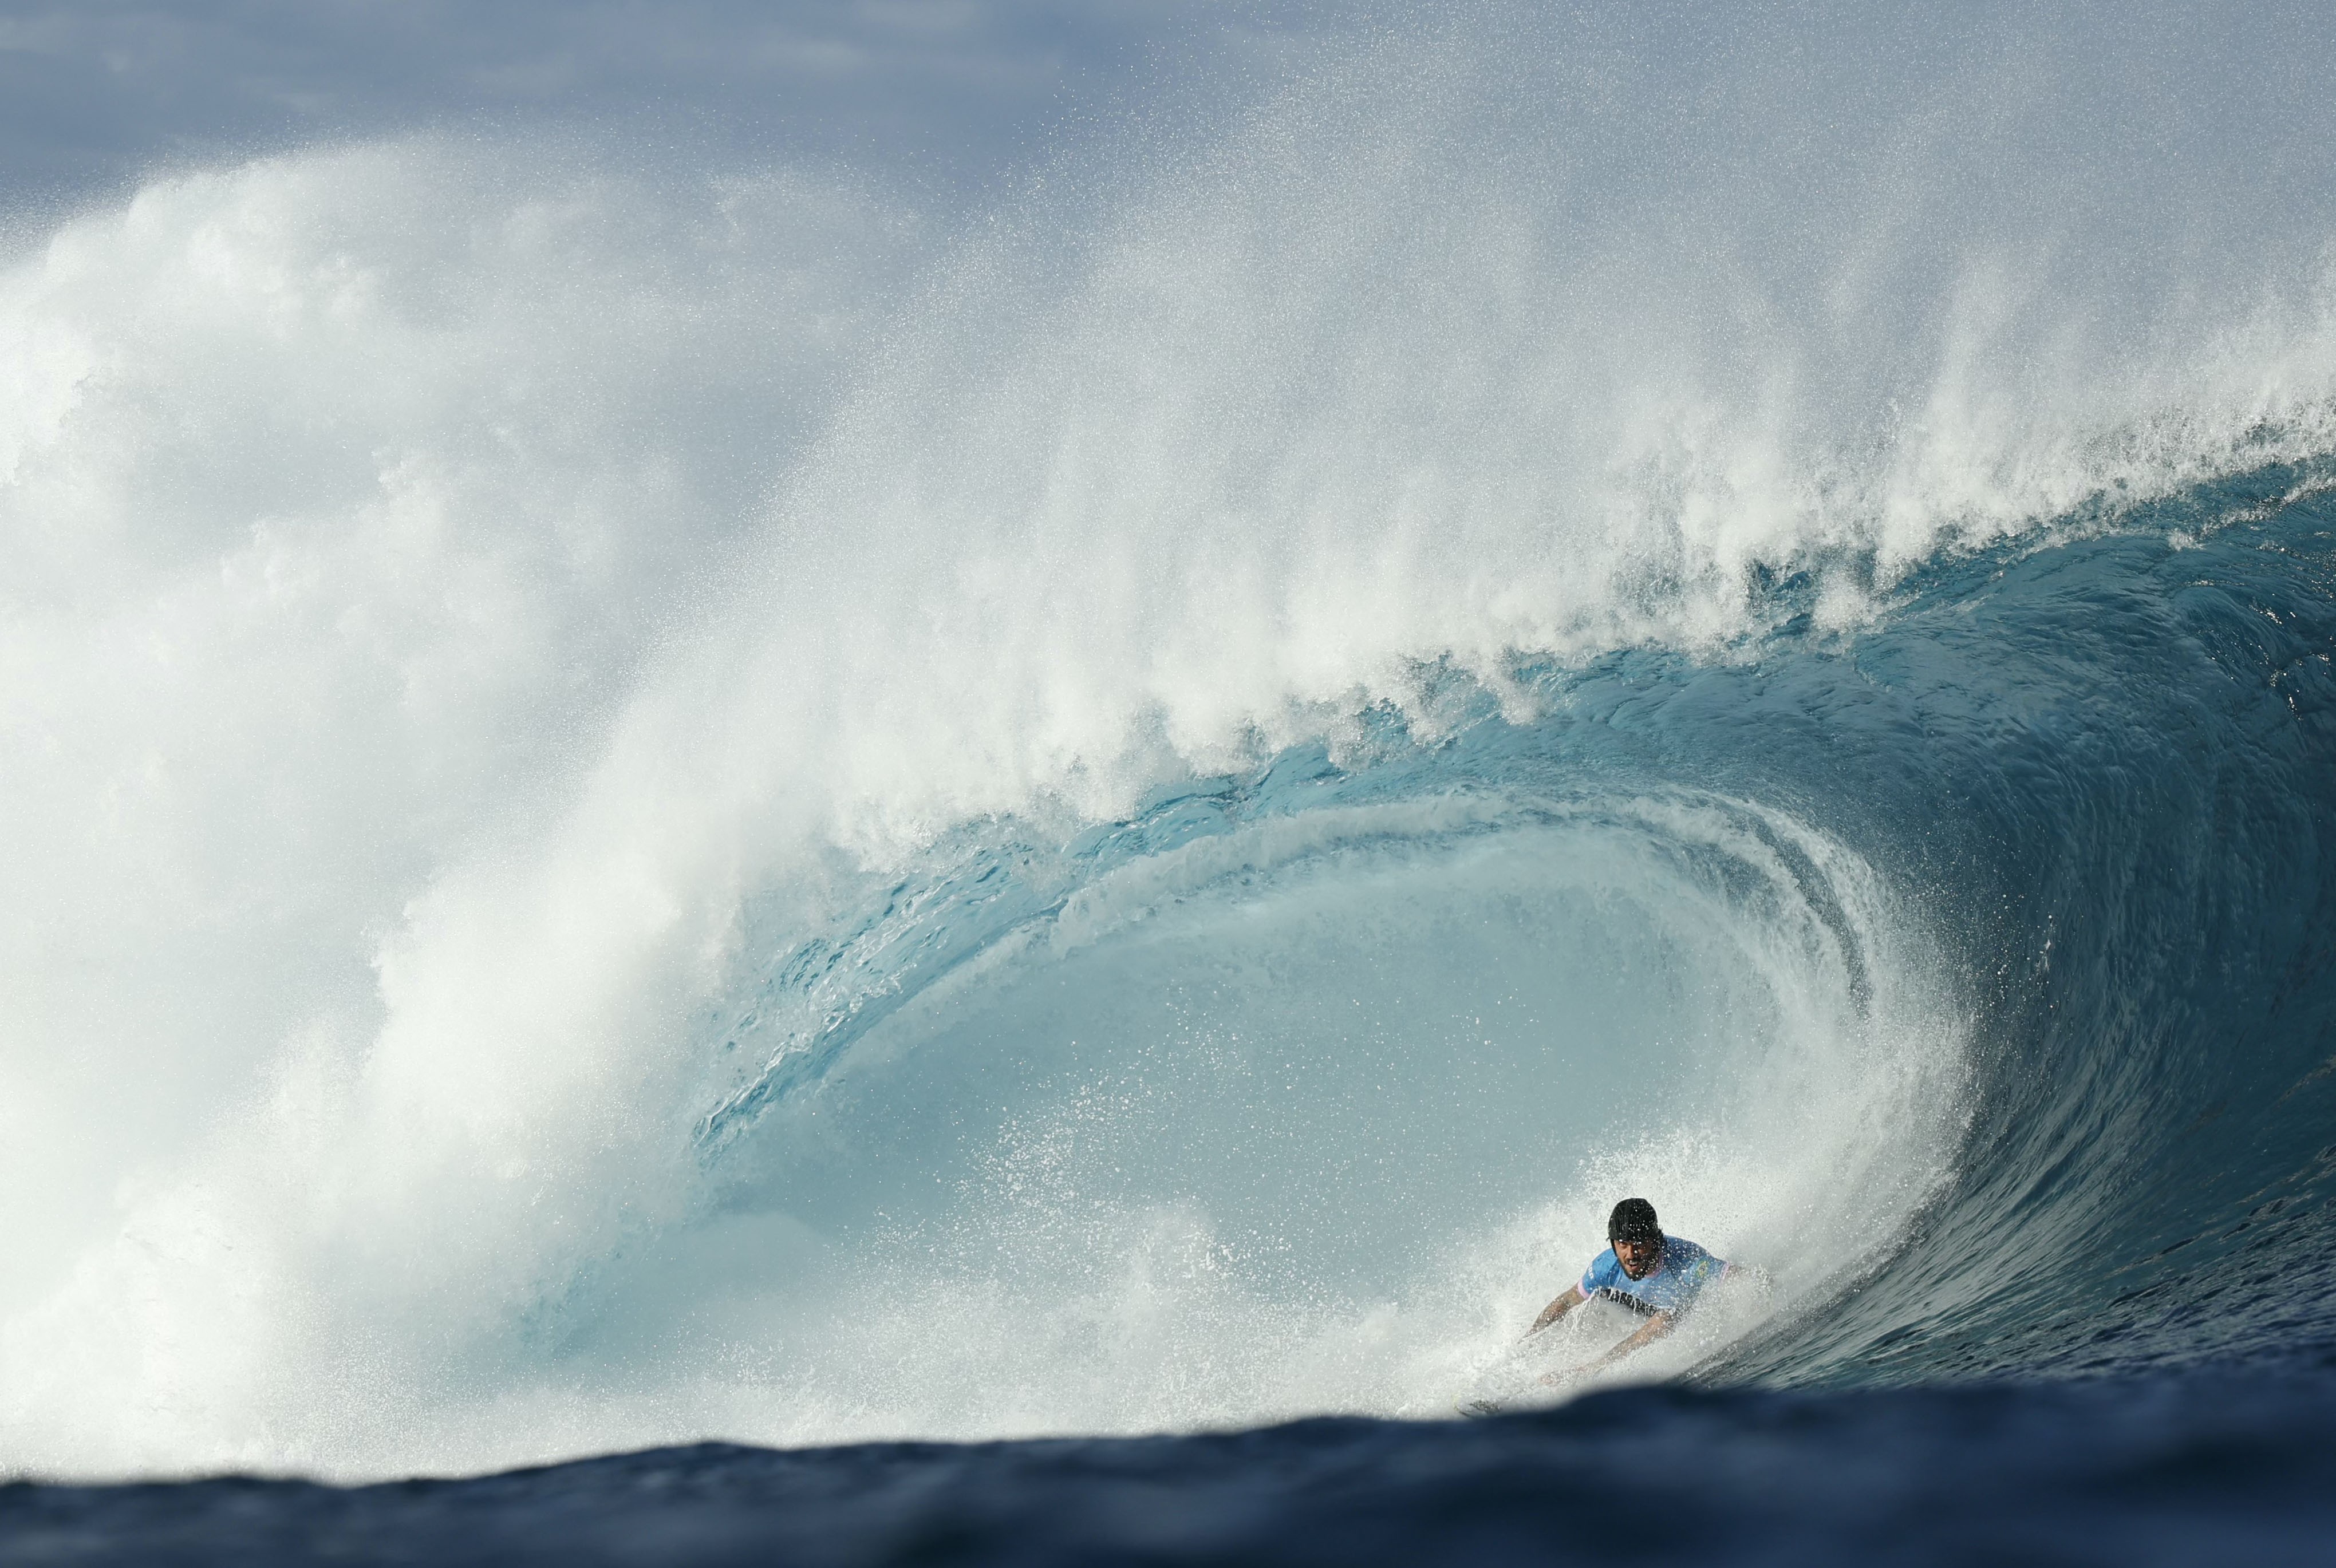 A surfer rides low inside the barrel of a huge breaking wave.